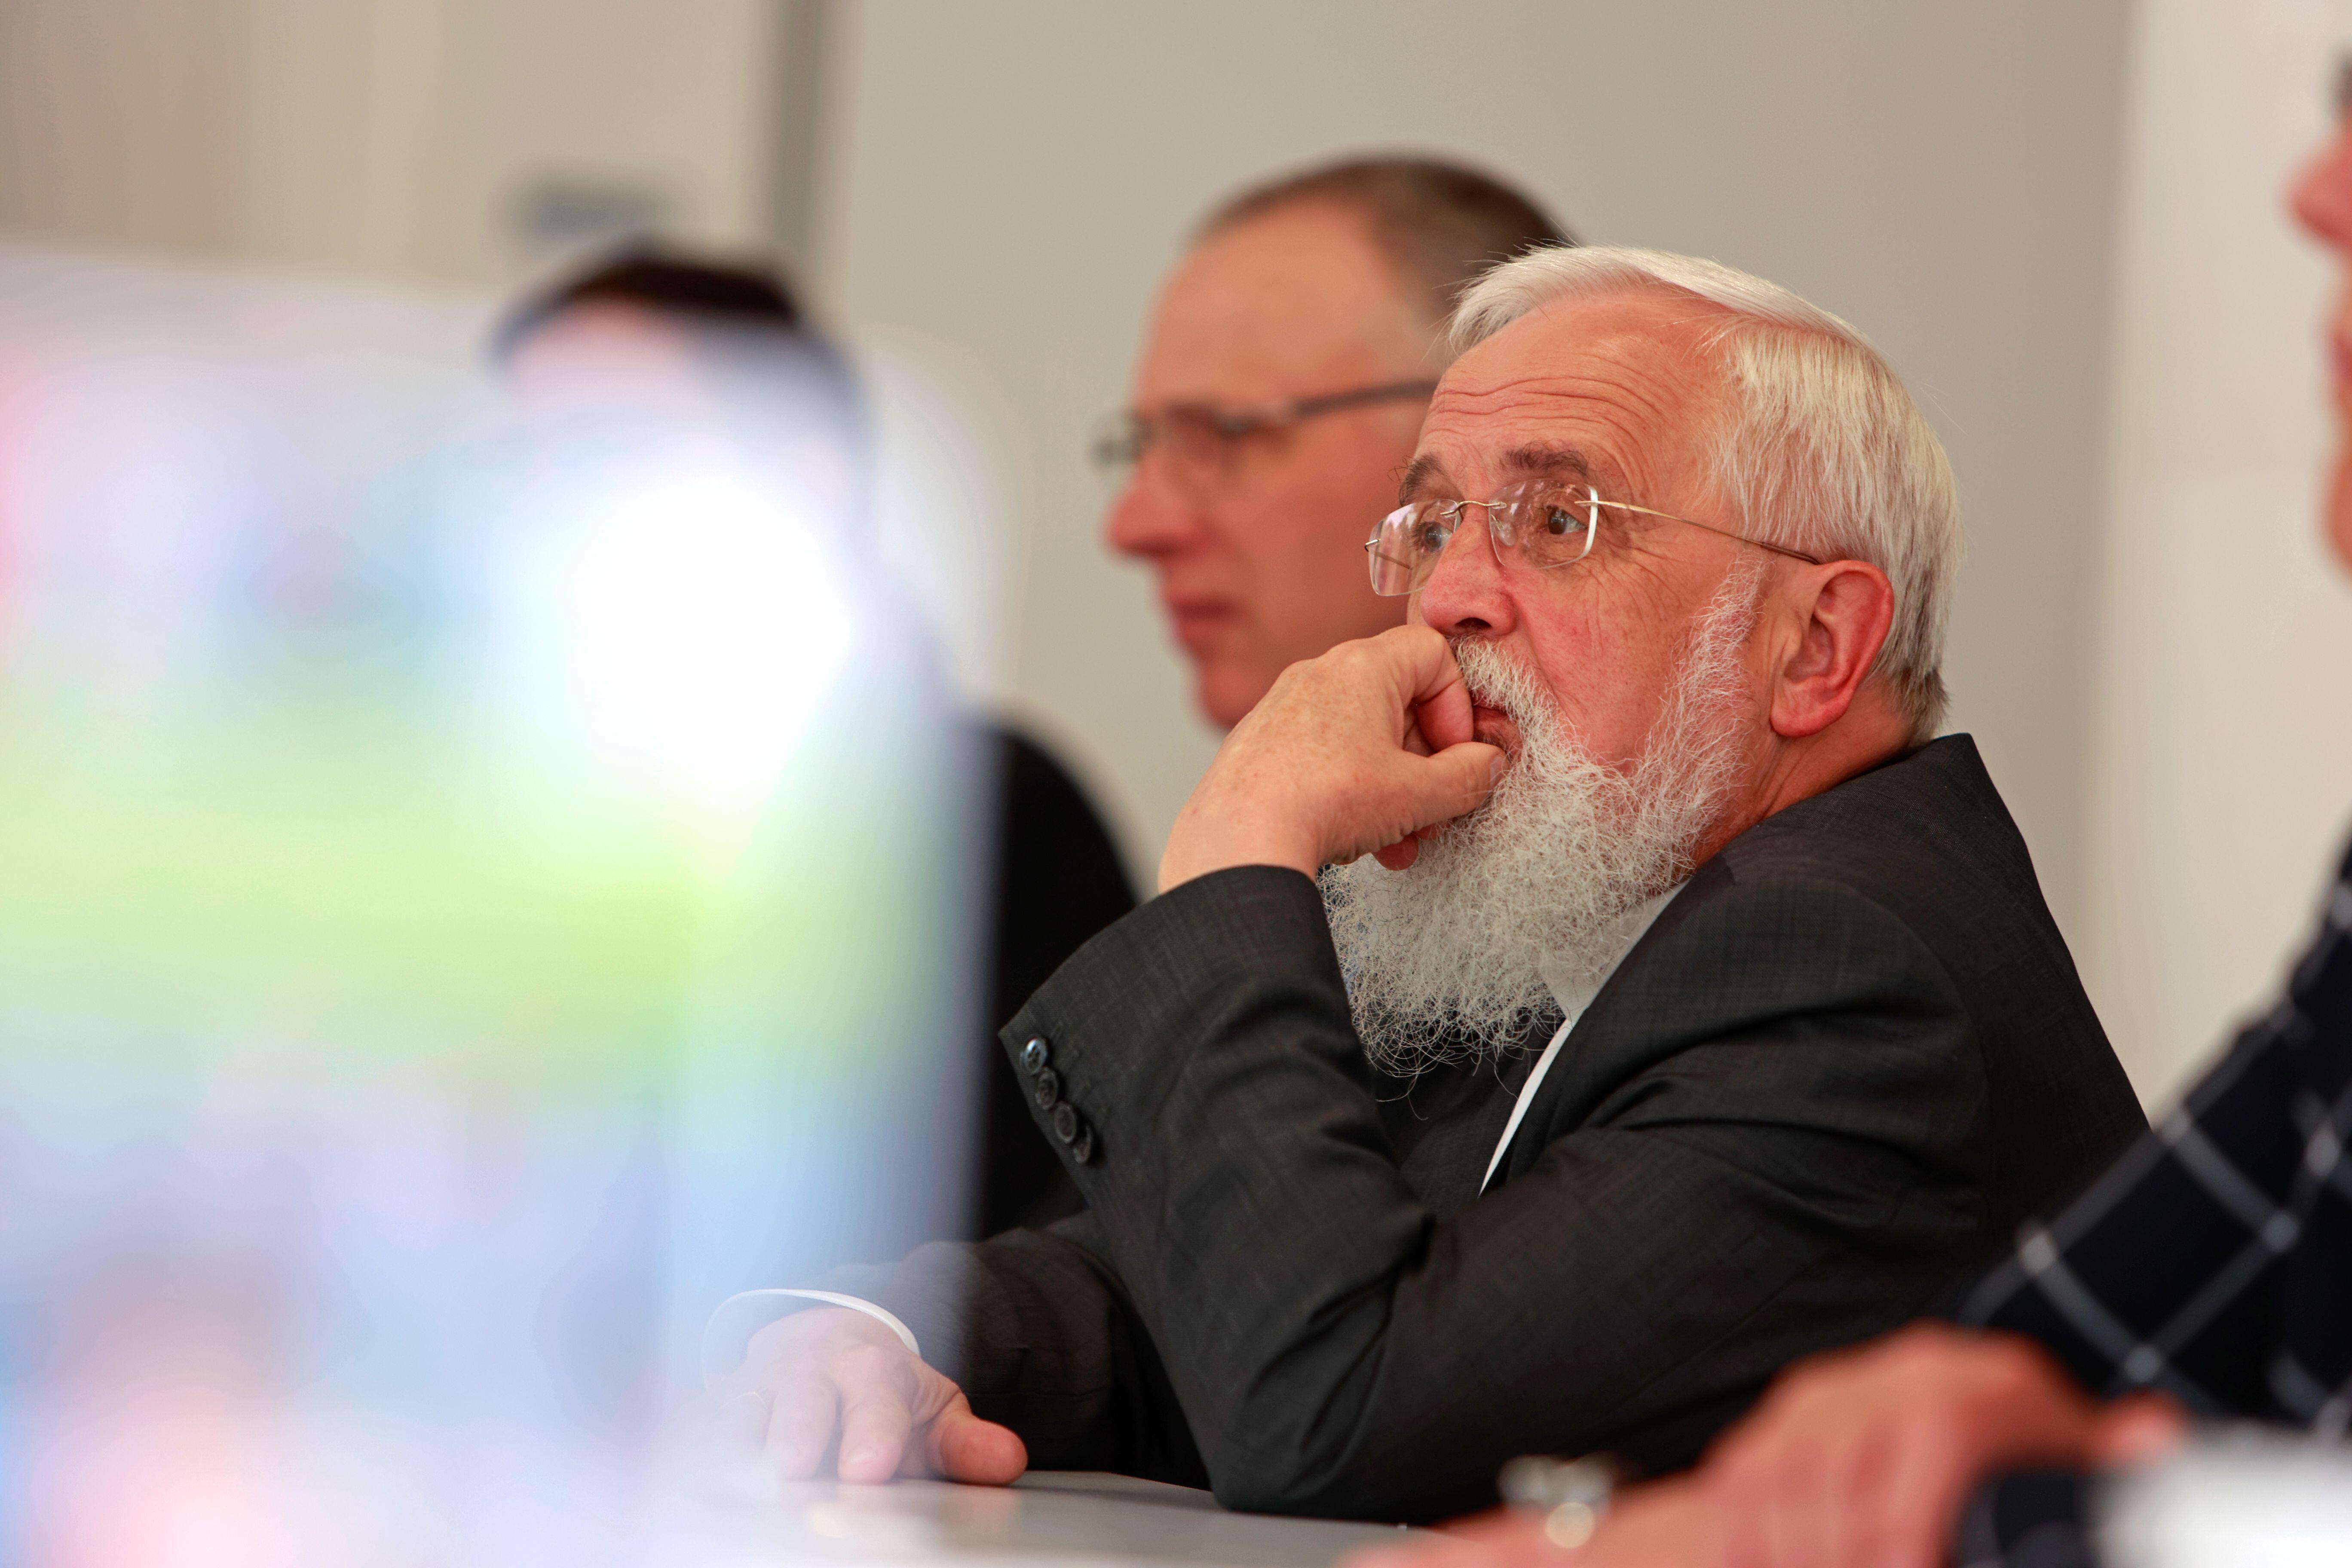 Abuse crises foster ‘ecumenical realism’ in Germany